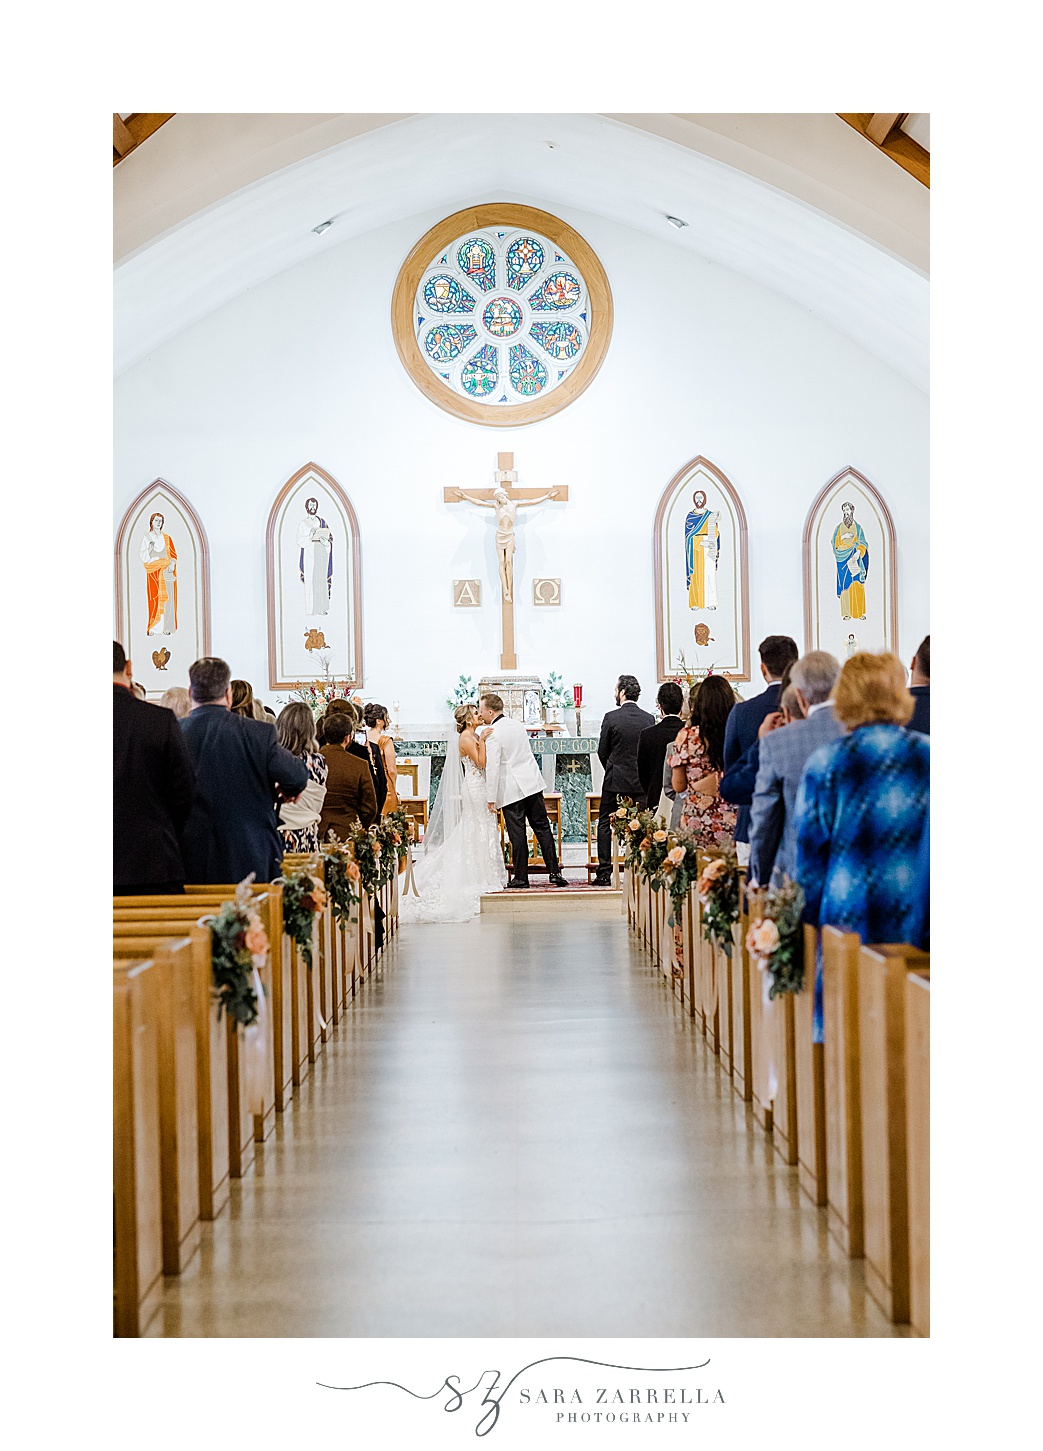 bride and groom pose at end of the alter during wedding ceremony at St Pius Church in Westerly RI